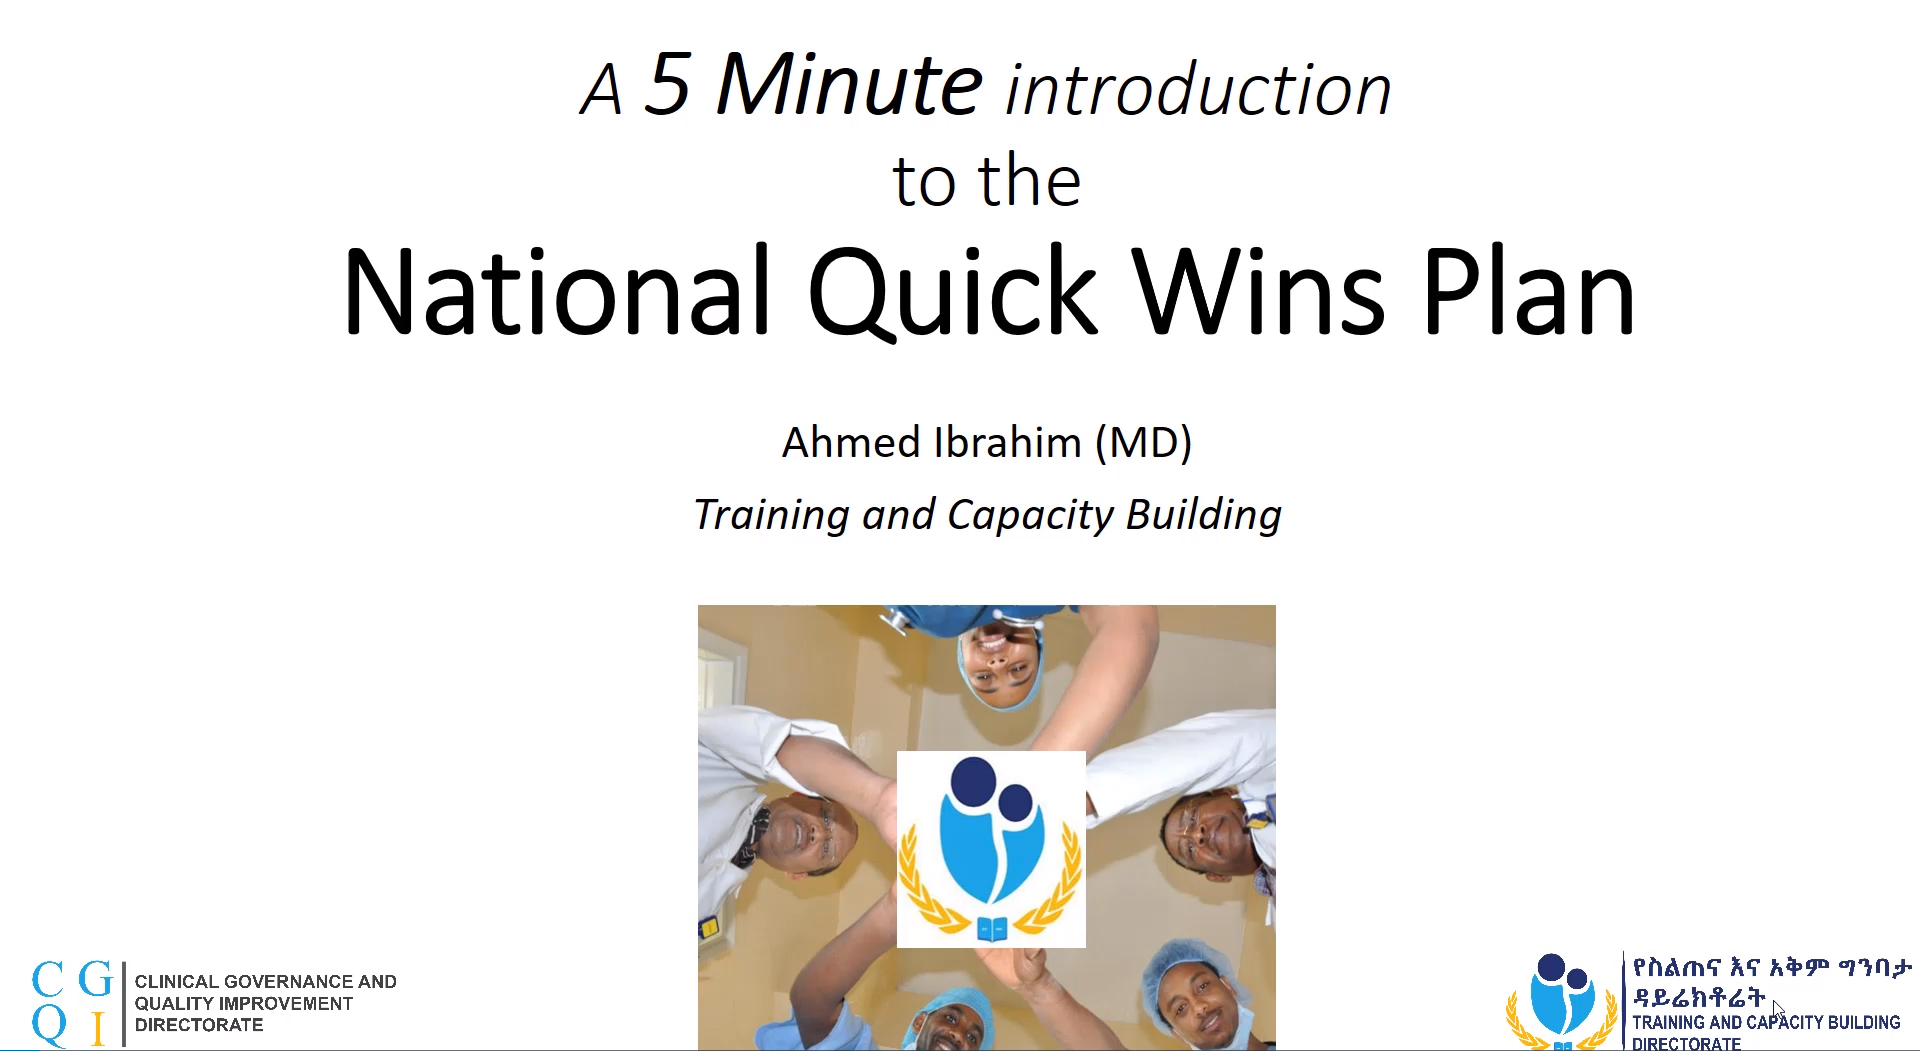 Introduction to the National Quick Wins Plan